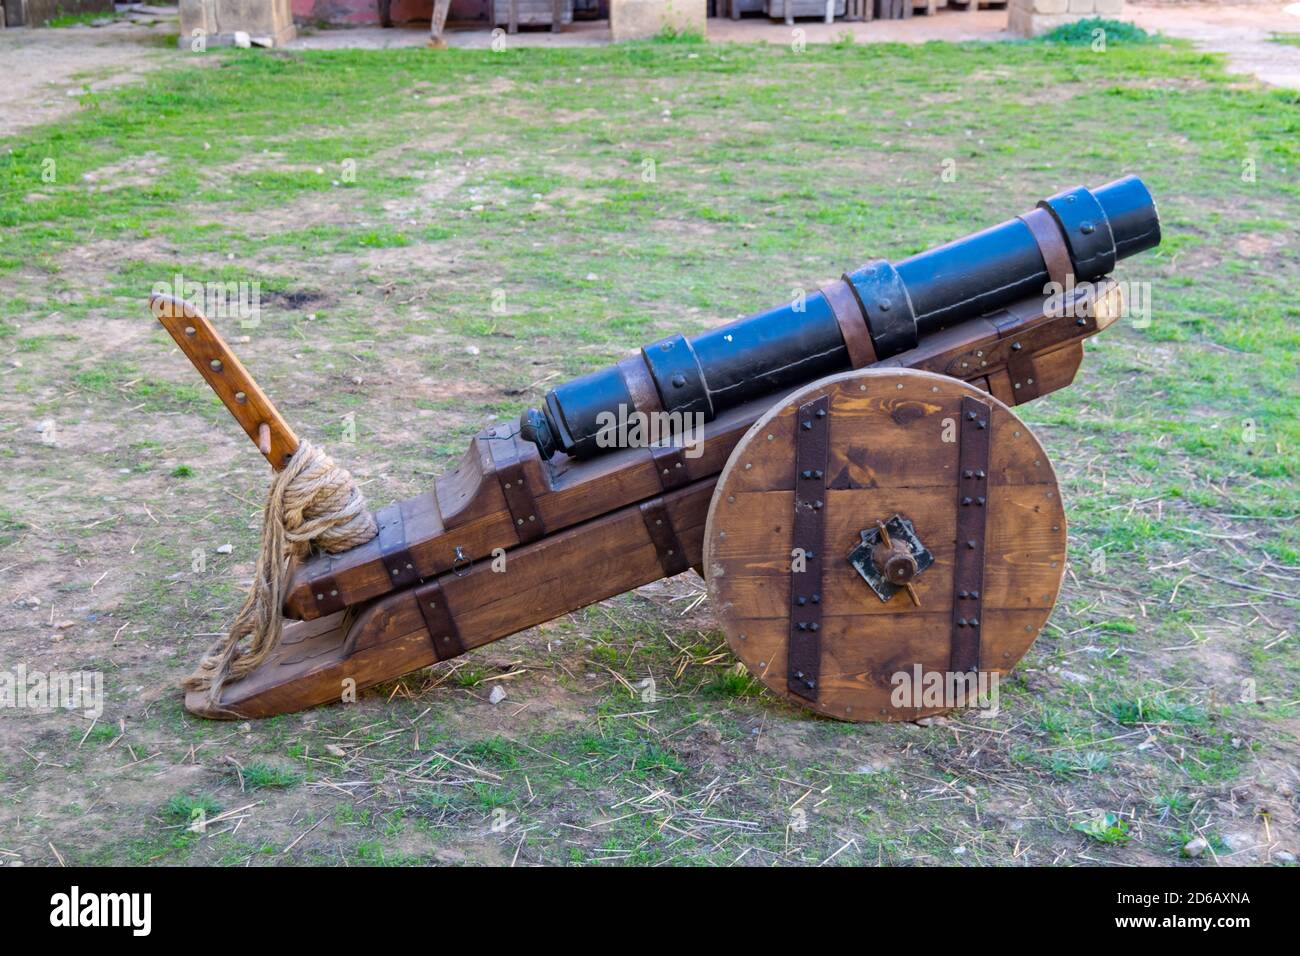 Ancient portable cannon used in filmmaking battles for recreations Stock Photo